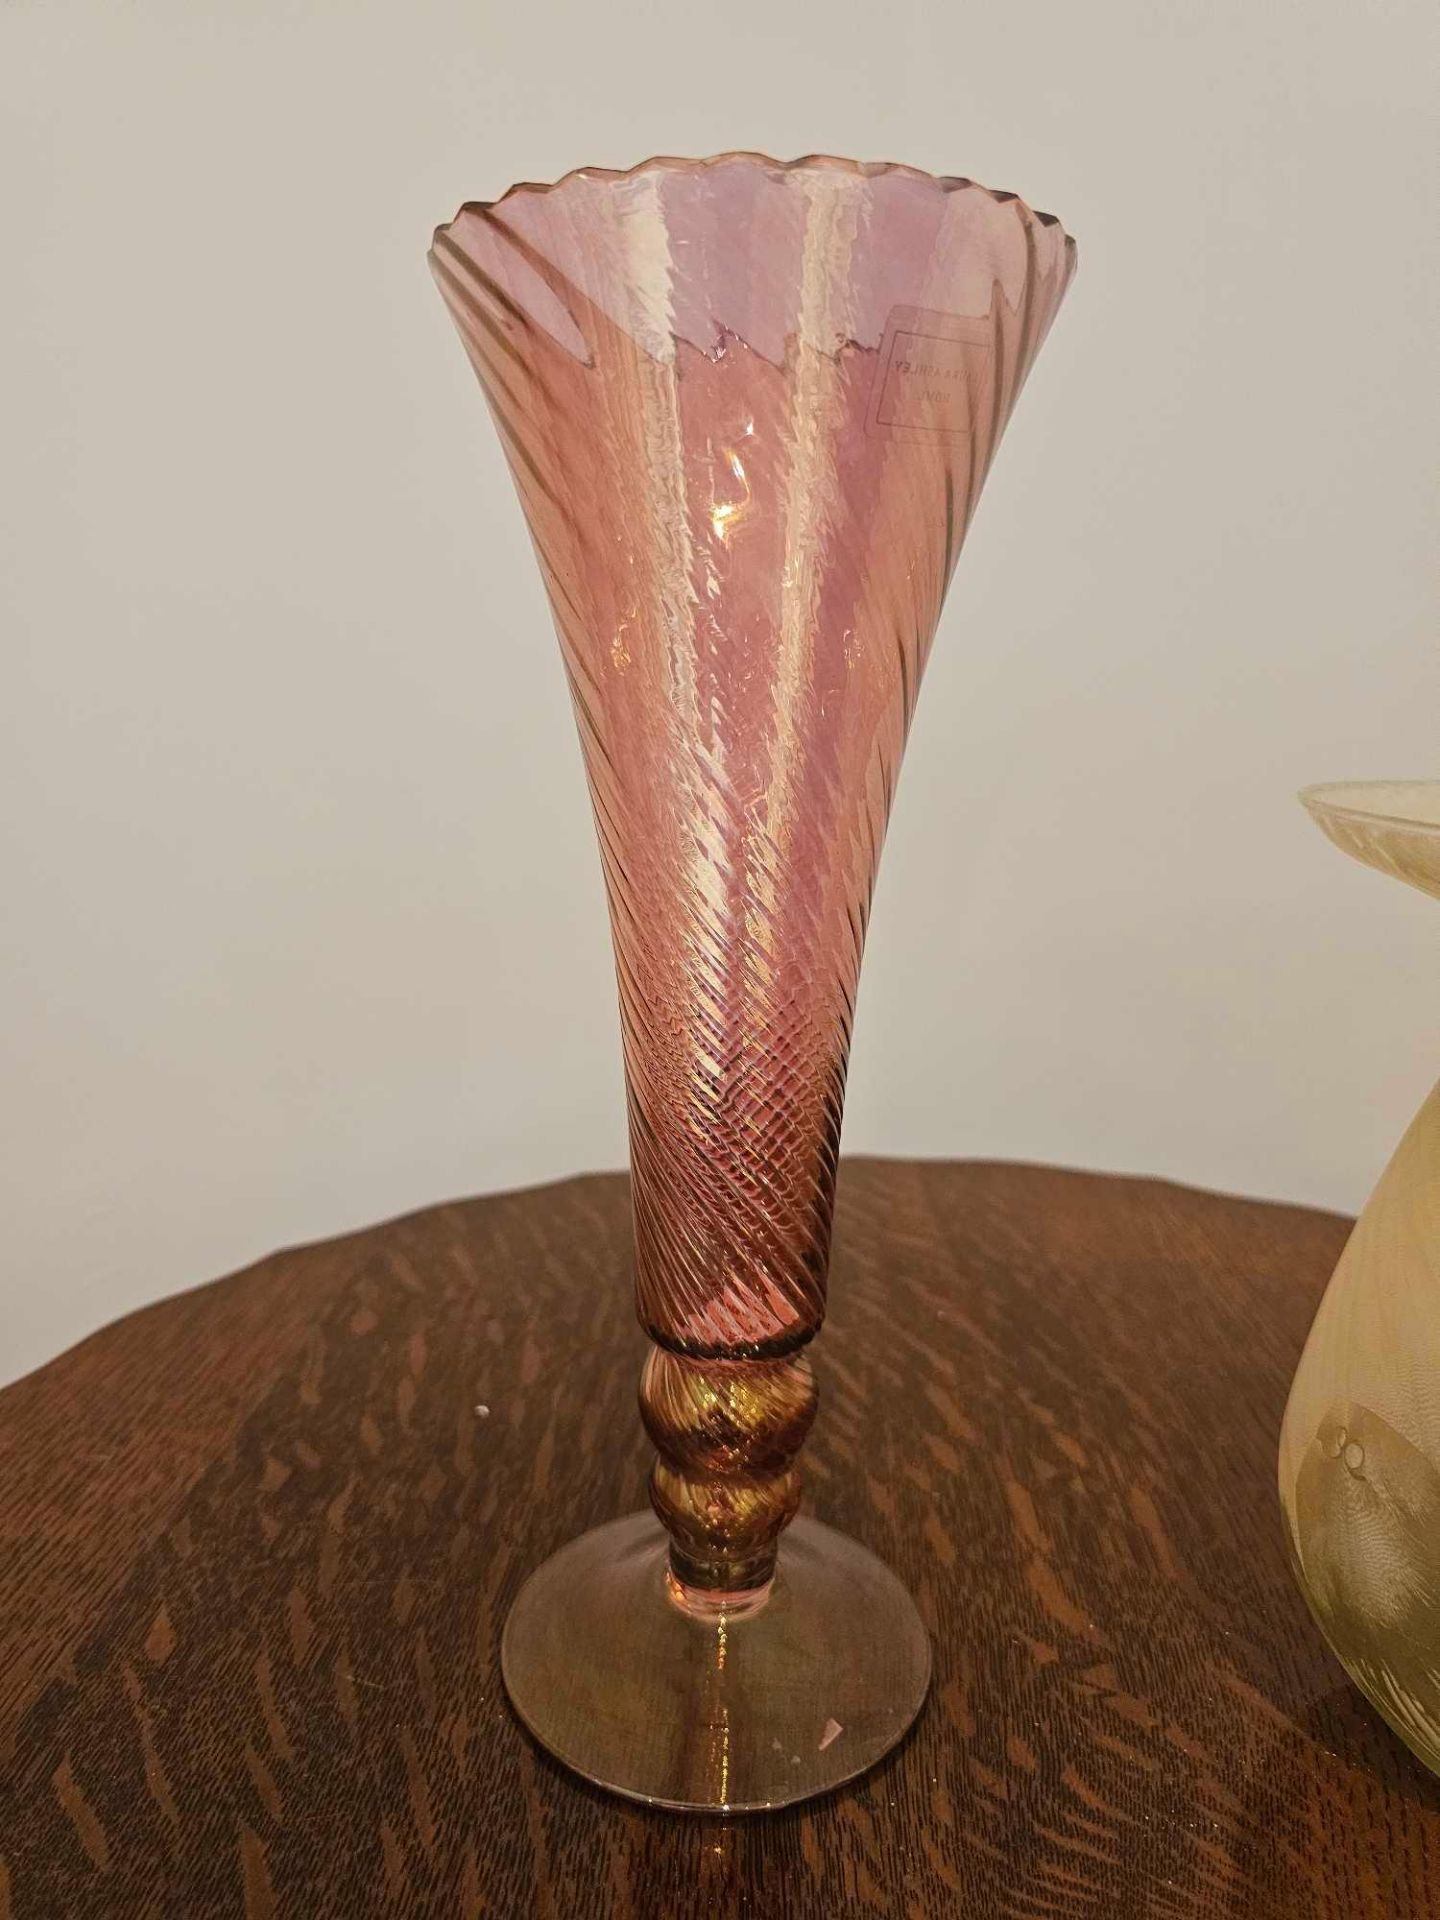 2 X Vases A Laura Ashley Home 29cm Pink Glass Baluster Vase And A Spanish Made 20cm Clear And Opaque - Image 2 of 9